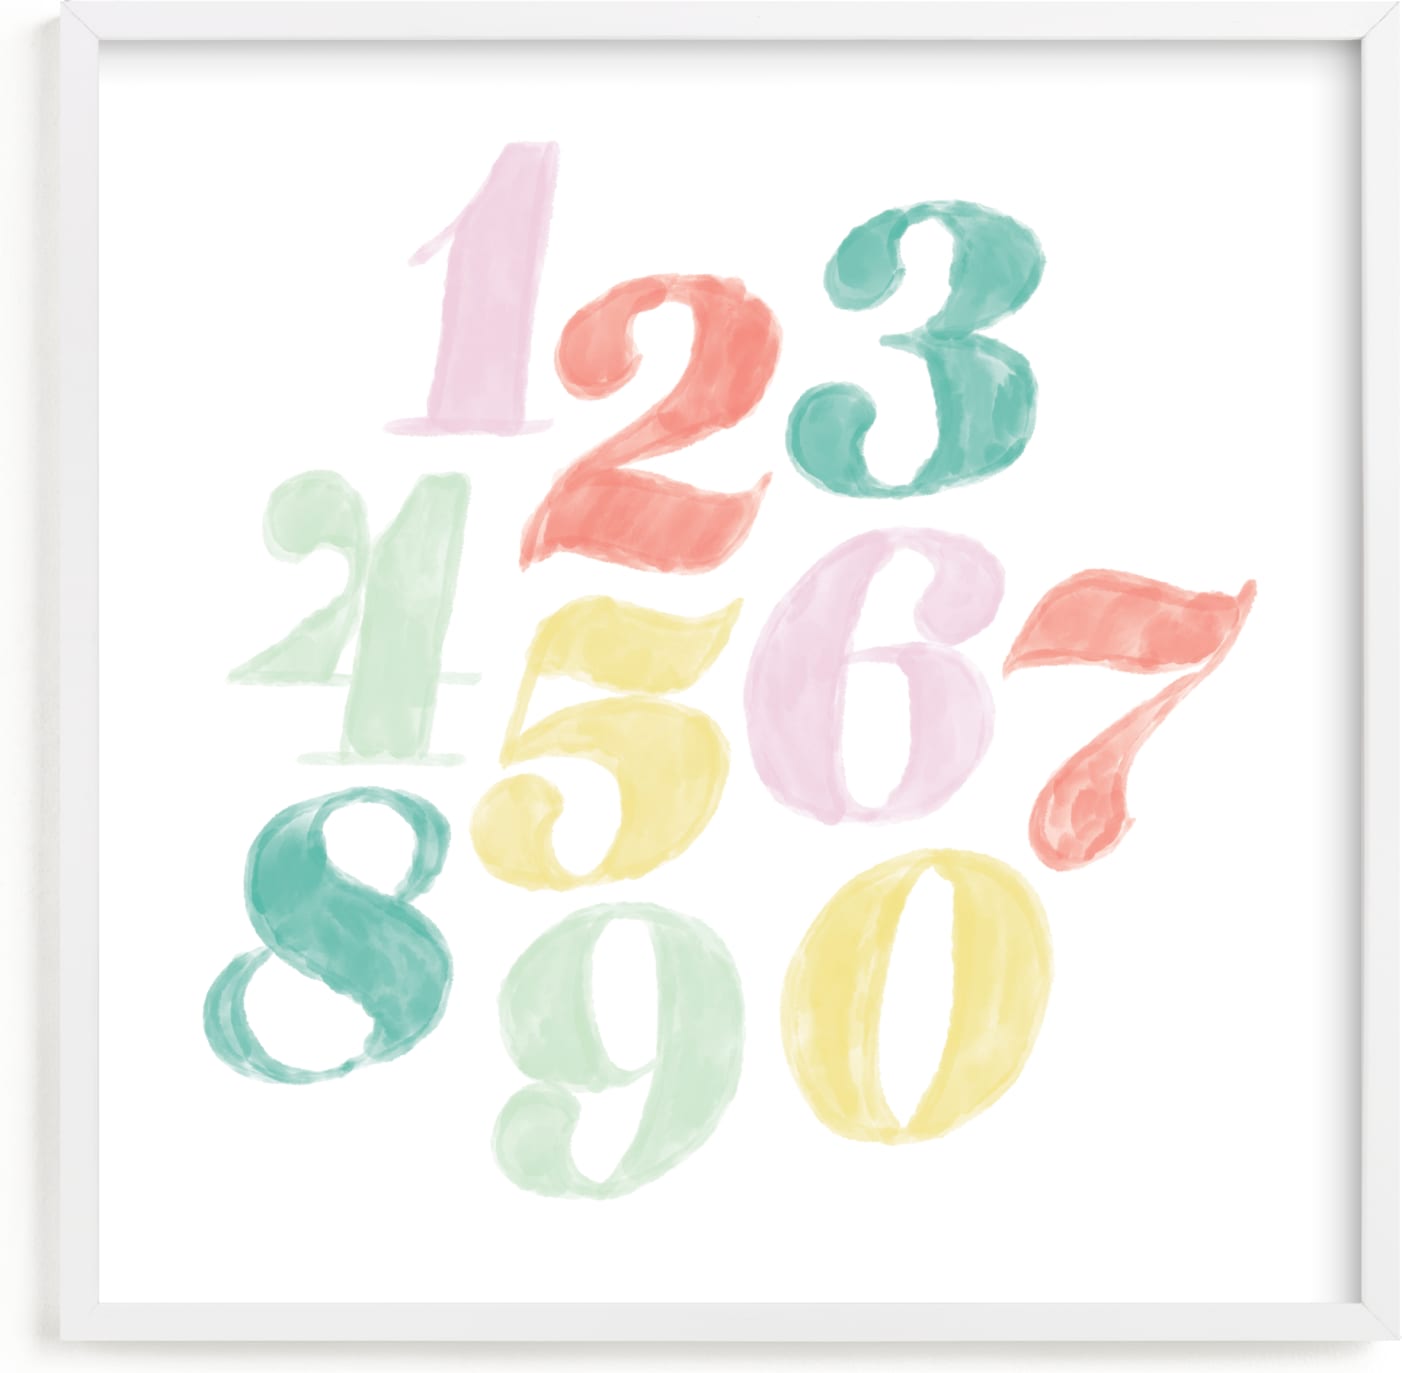 This is a colorful nursery wall art by Carolyn Kach called Numerals.